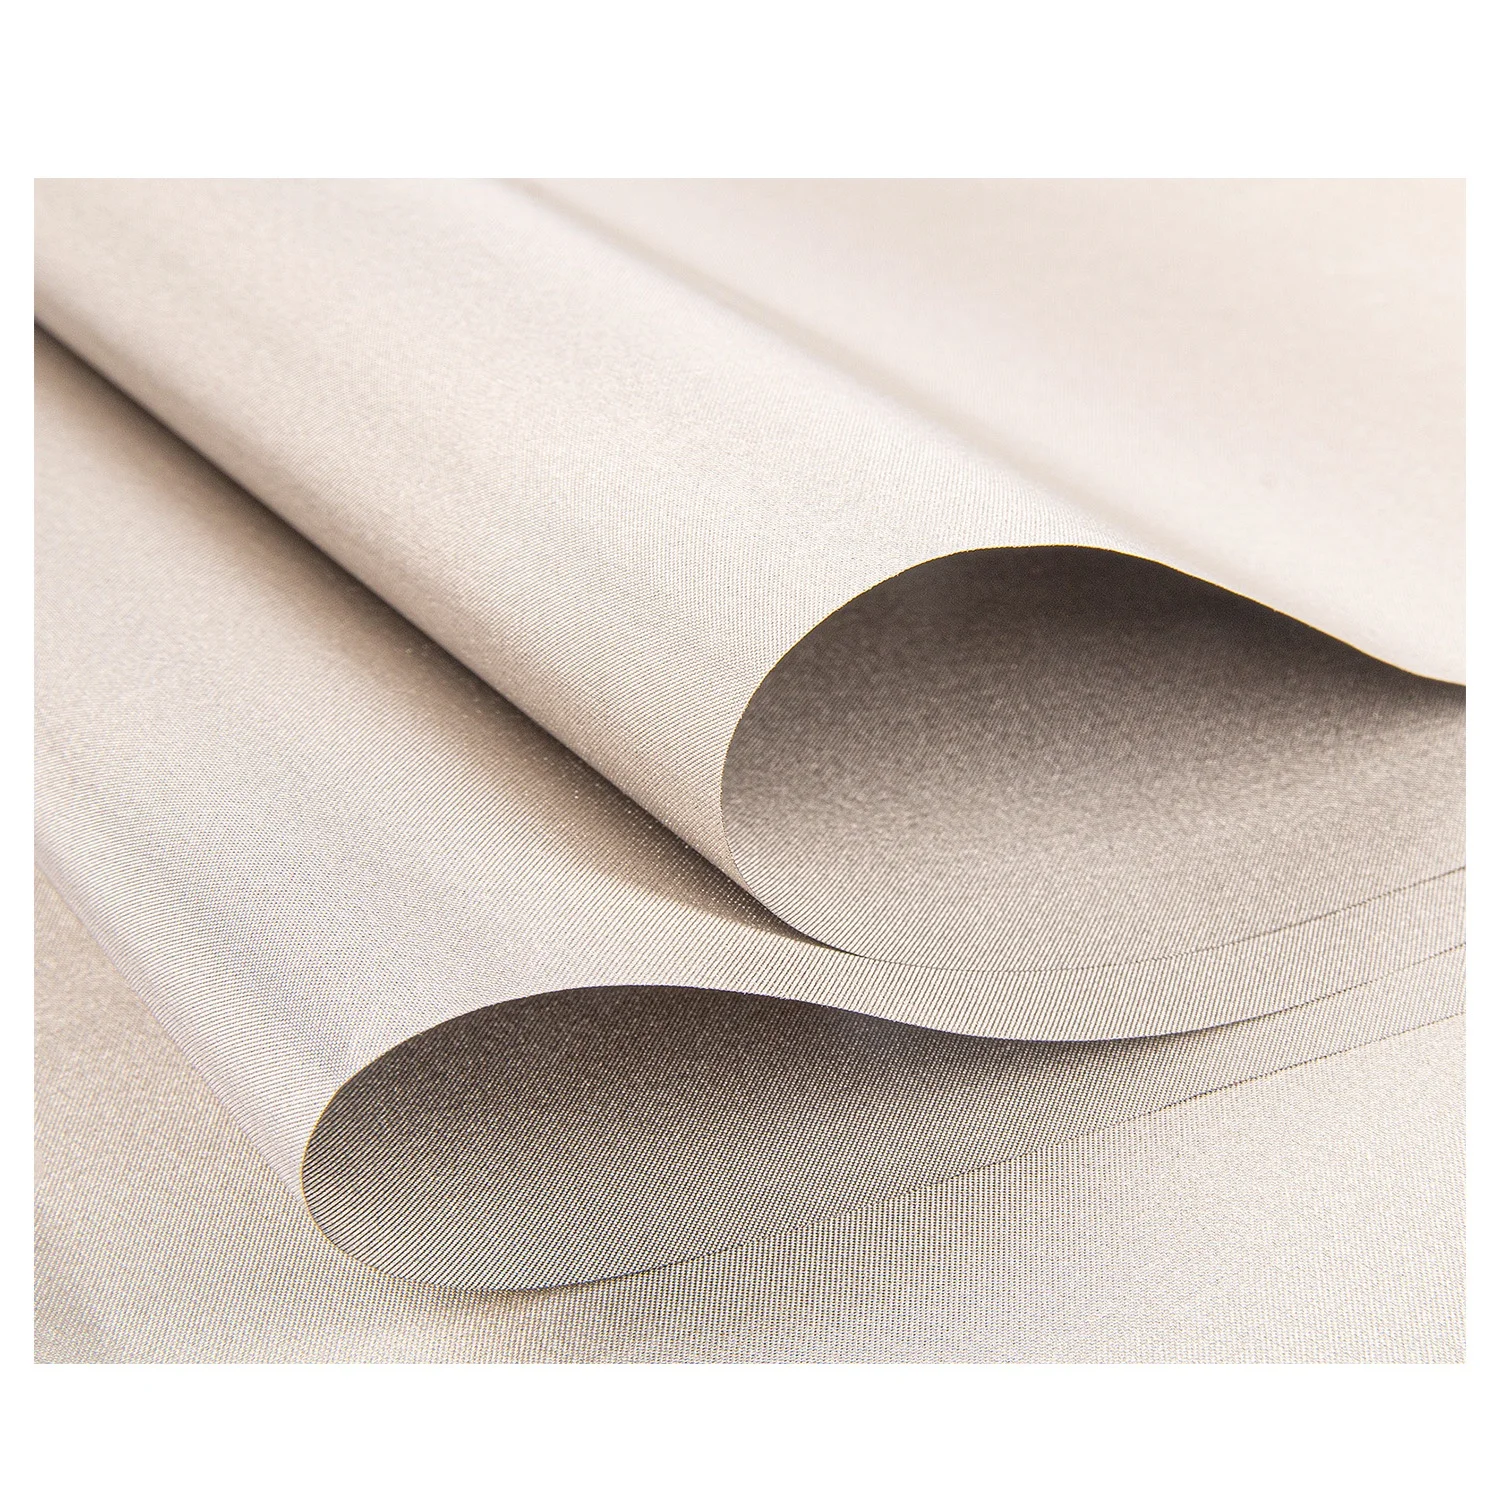 0.08MM thick electromagnetic shielding fabric anti-radiation fabric